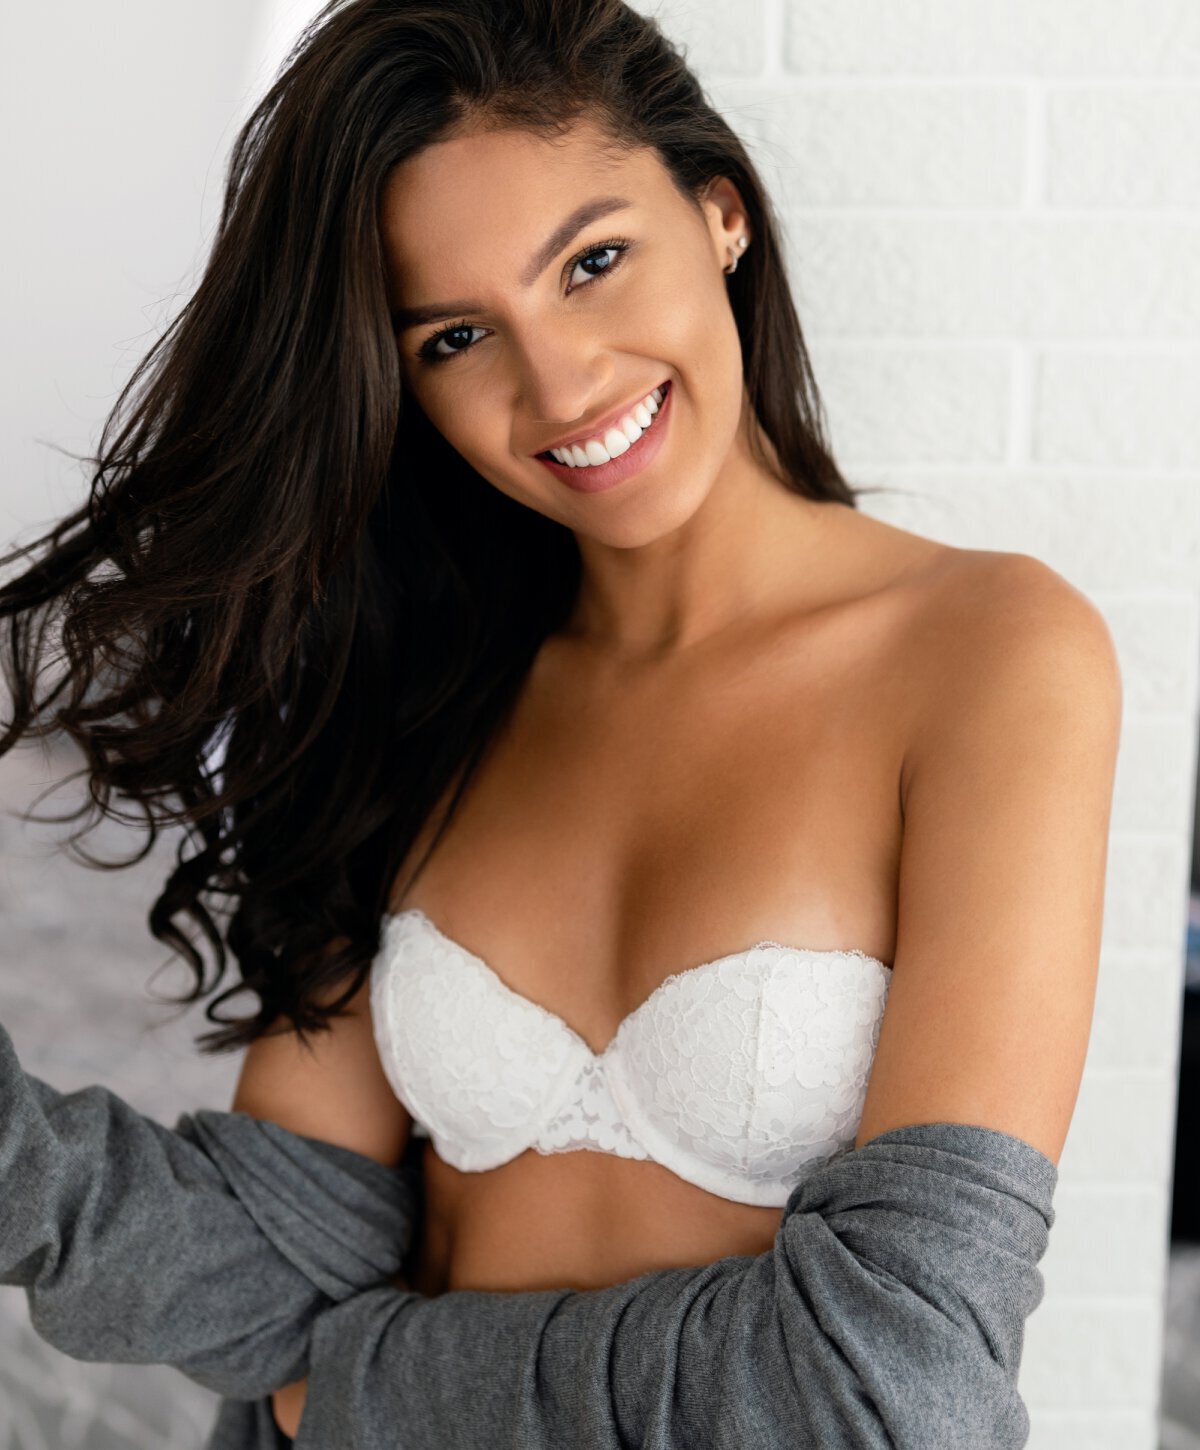 Austin breast implant replacement model with black hair